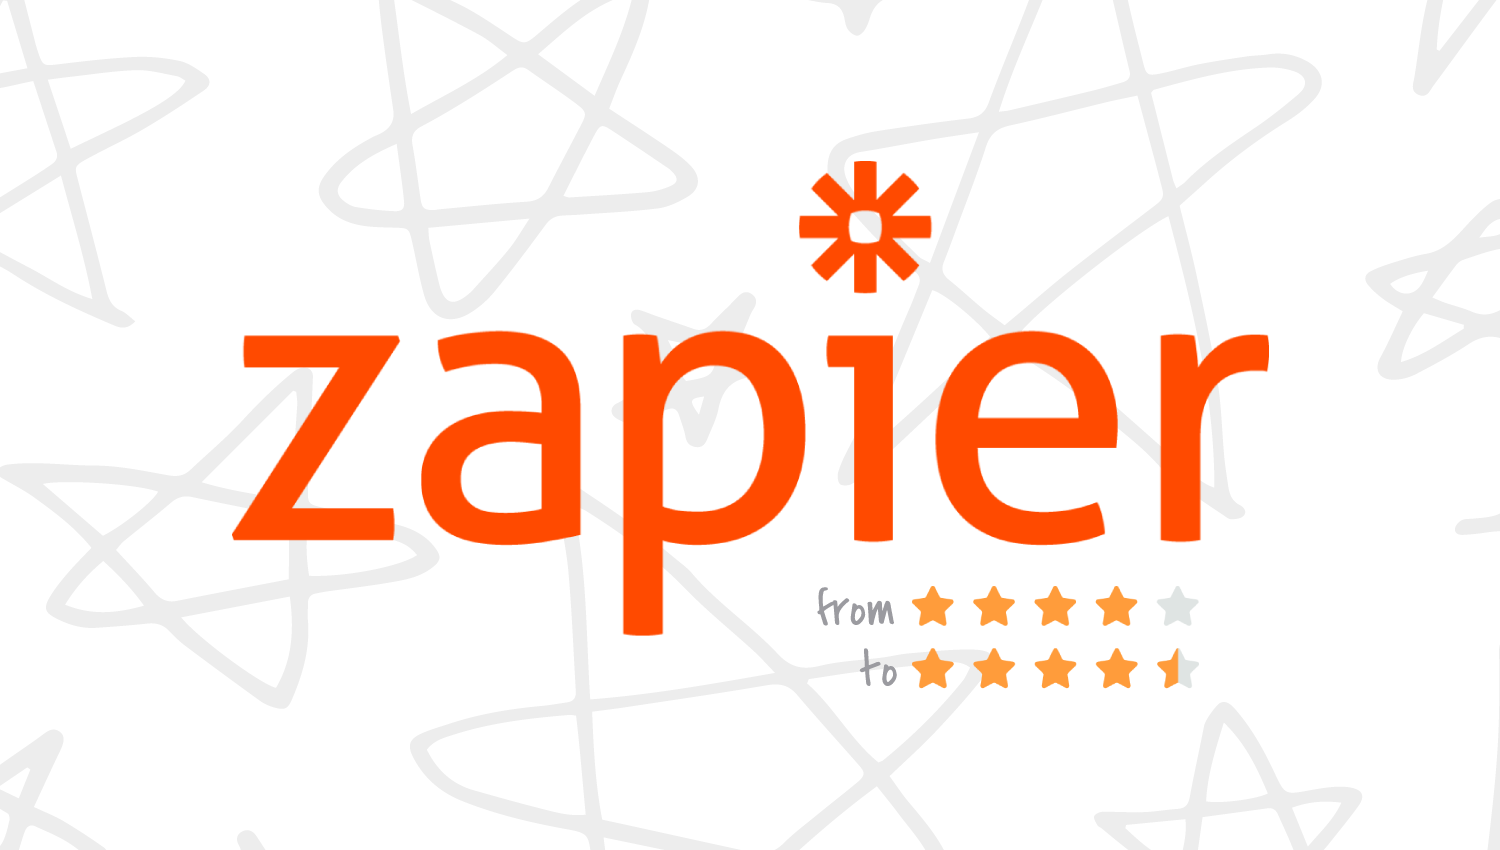 Tips by Zapier: How to motivate a fully remote customer service team - TalentLMS eBook